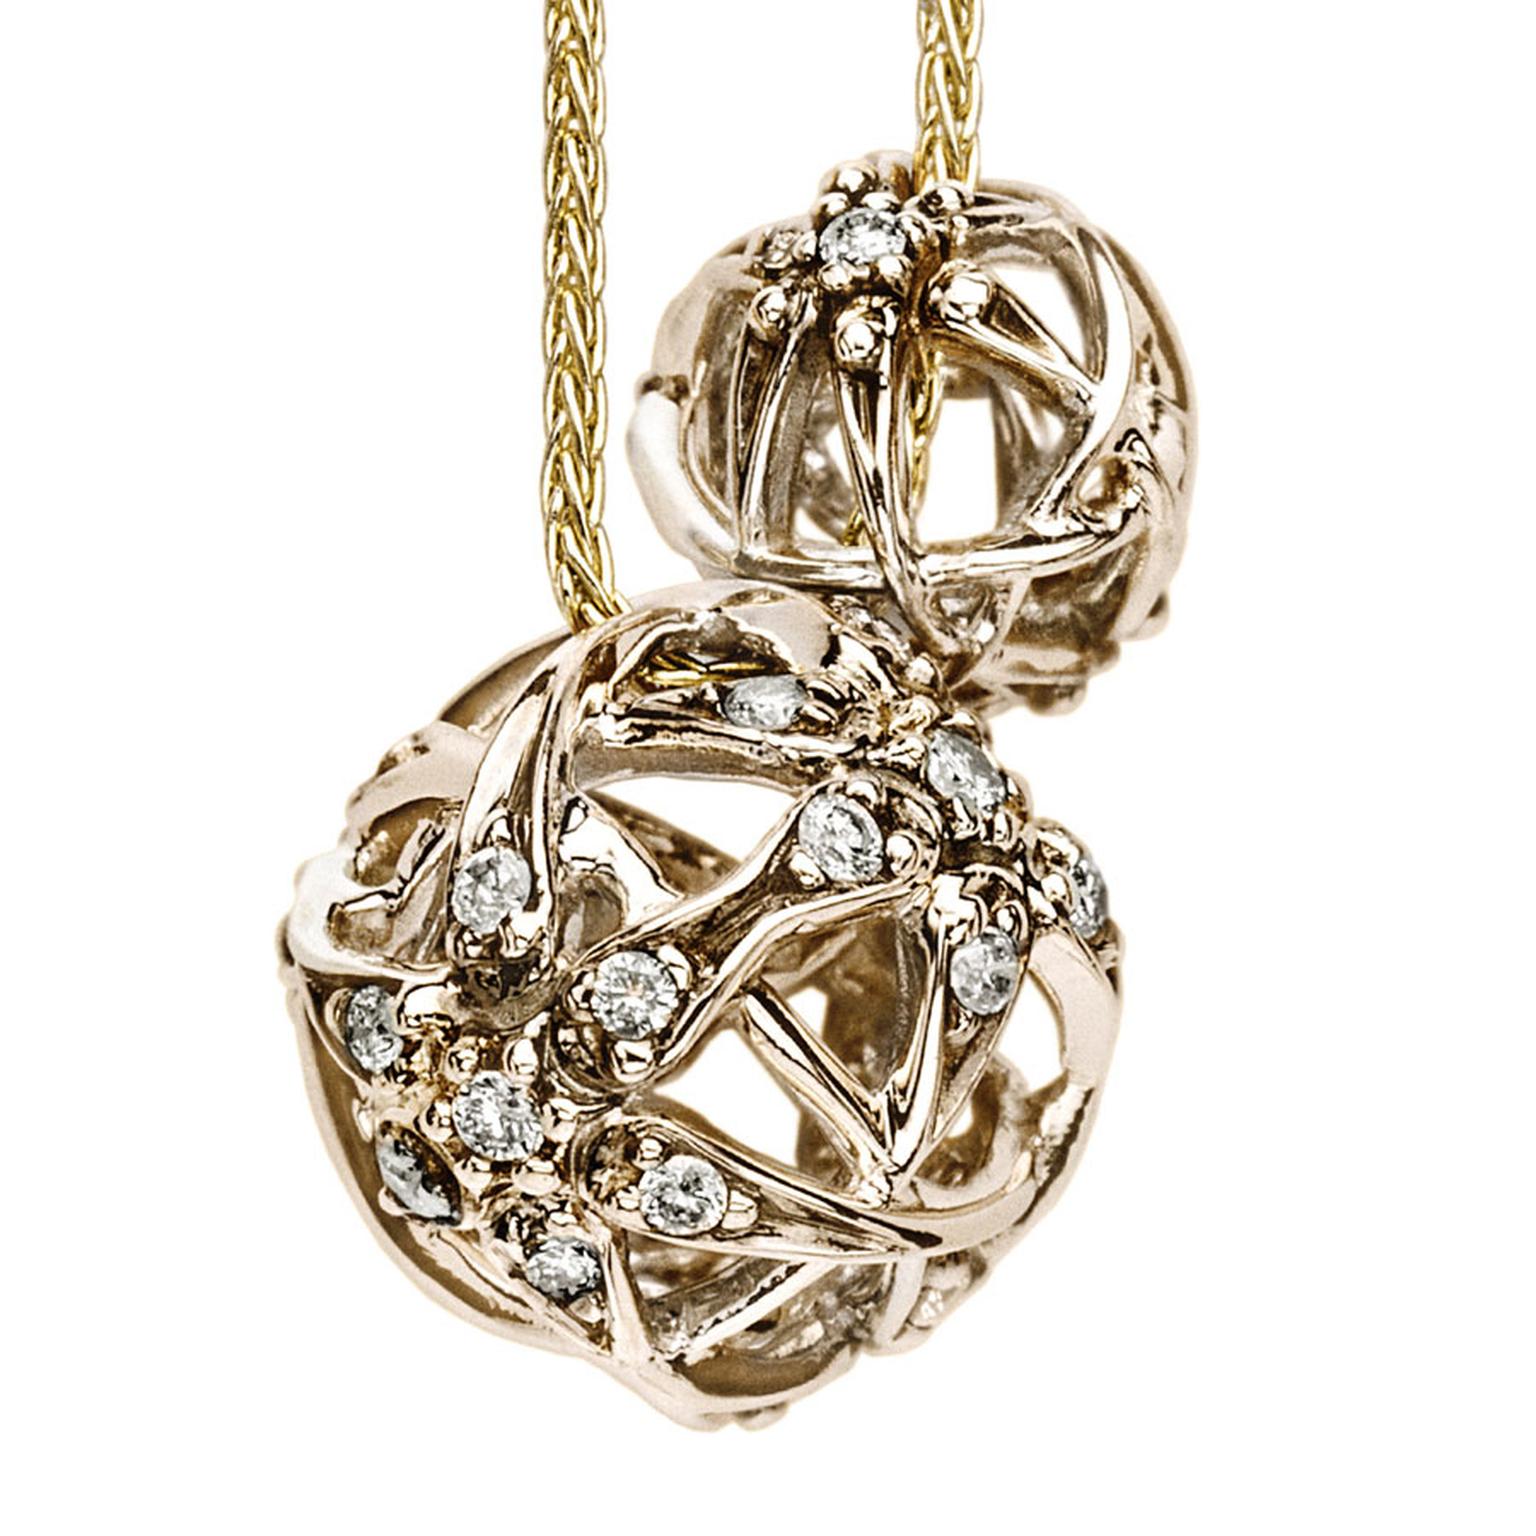 Hstern Copernicus-pendant---Noble-Gold-and-diamonds-spheres-in-yellow-gold-chains